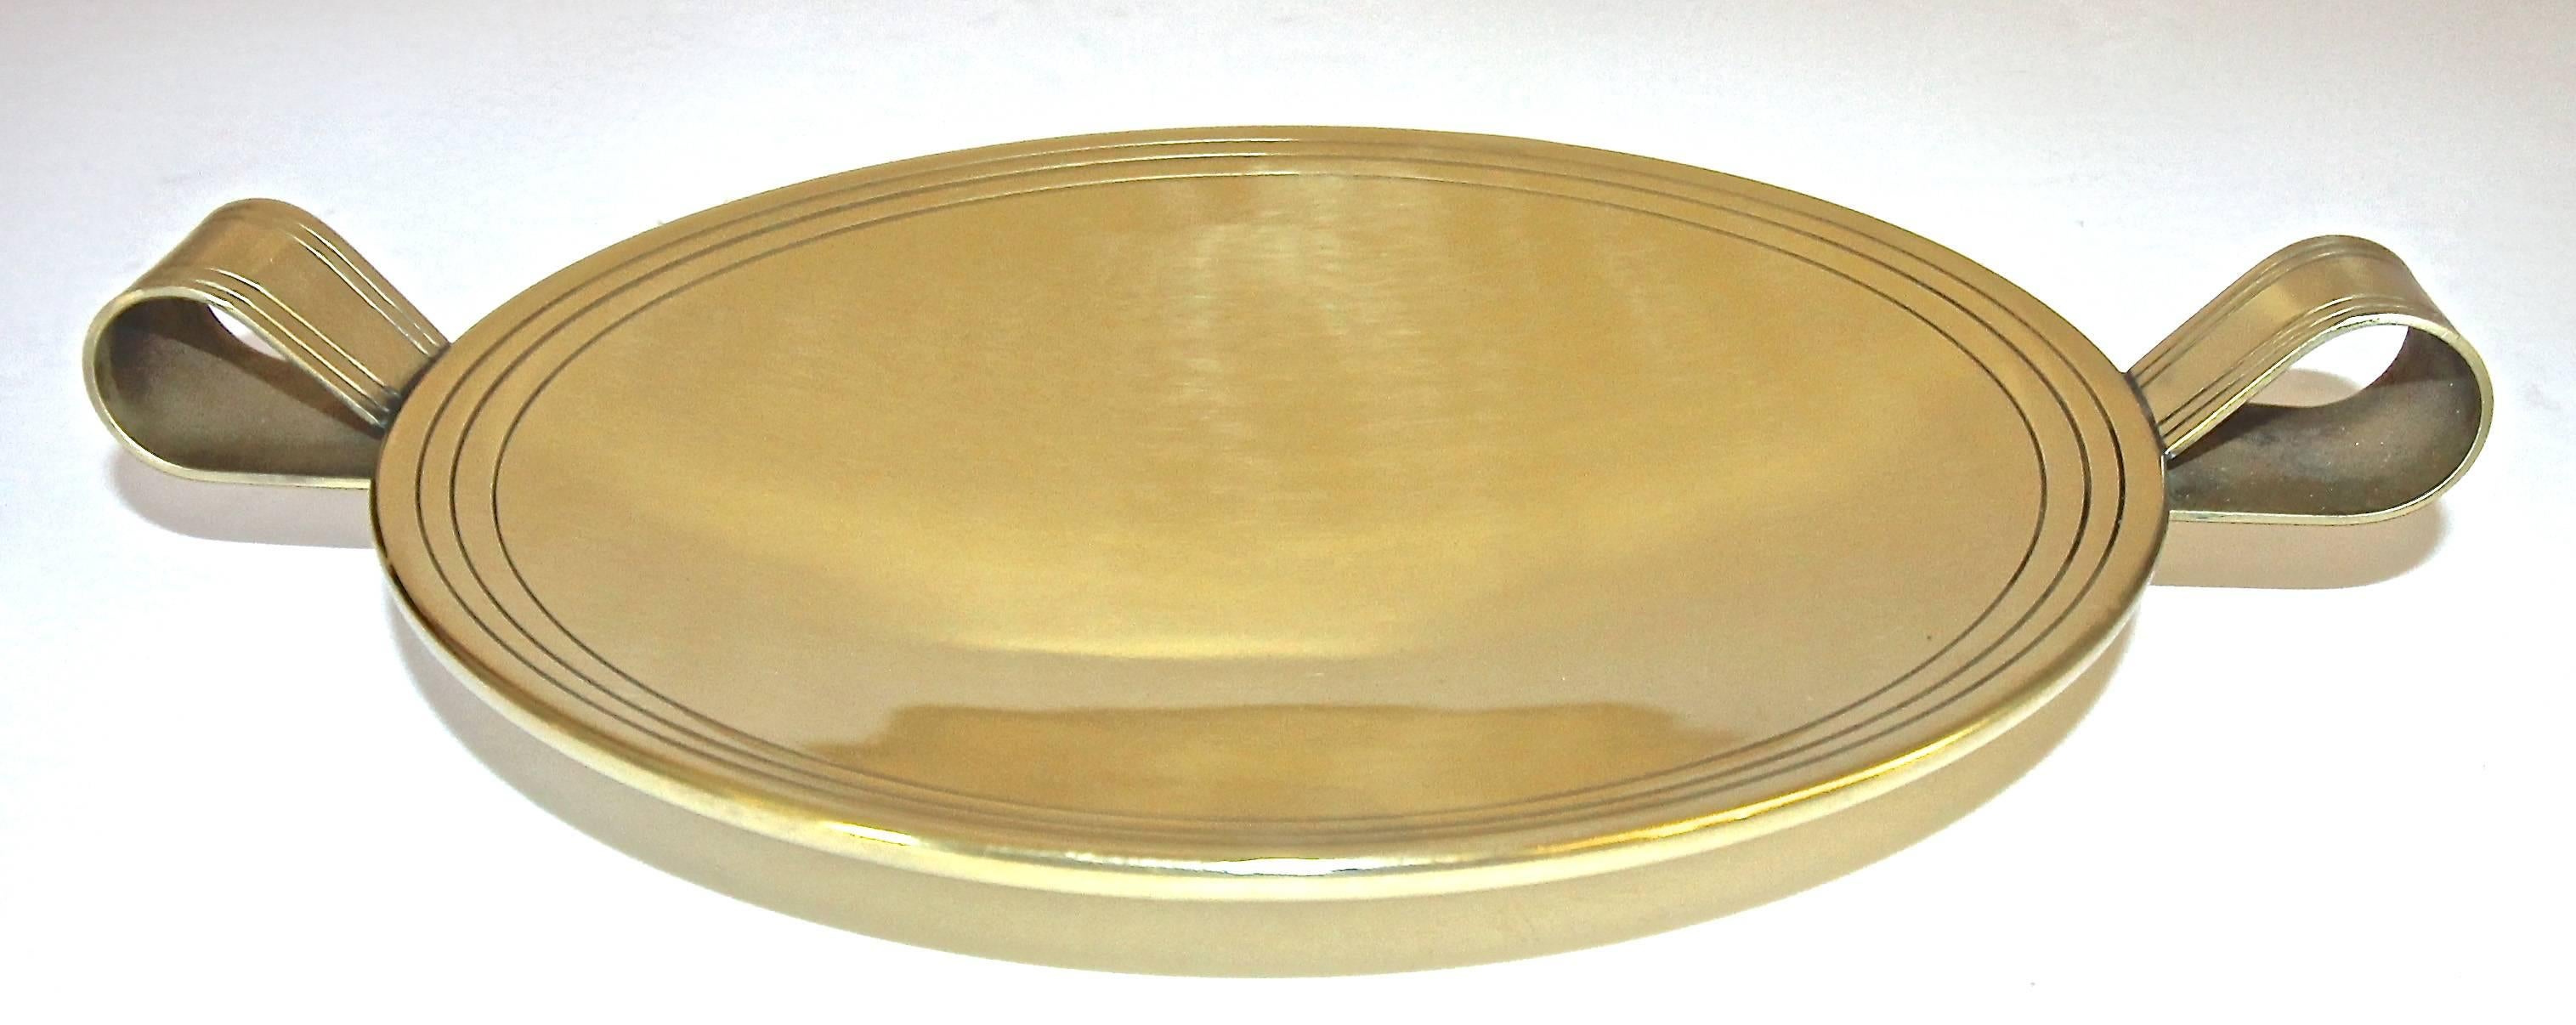 Polished brass dish with handles designed by Tommi Parzinger for Vincent Lippe / Dorlyn Silversmiths, New York. Each element of the Dorlyn accessories was handcrafted from sheet brass in New York. Stamped Dorlyn Silversmiths. More recently polished